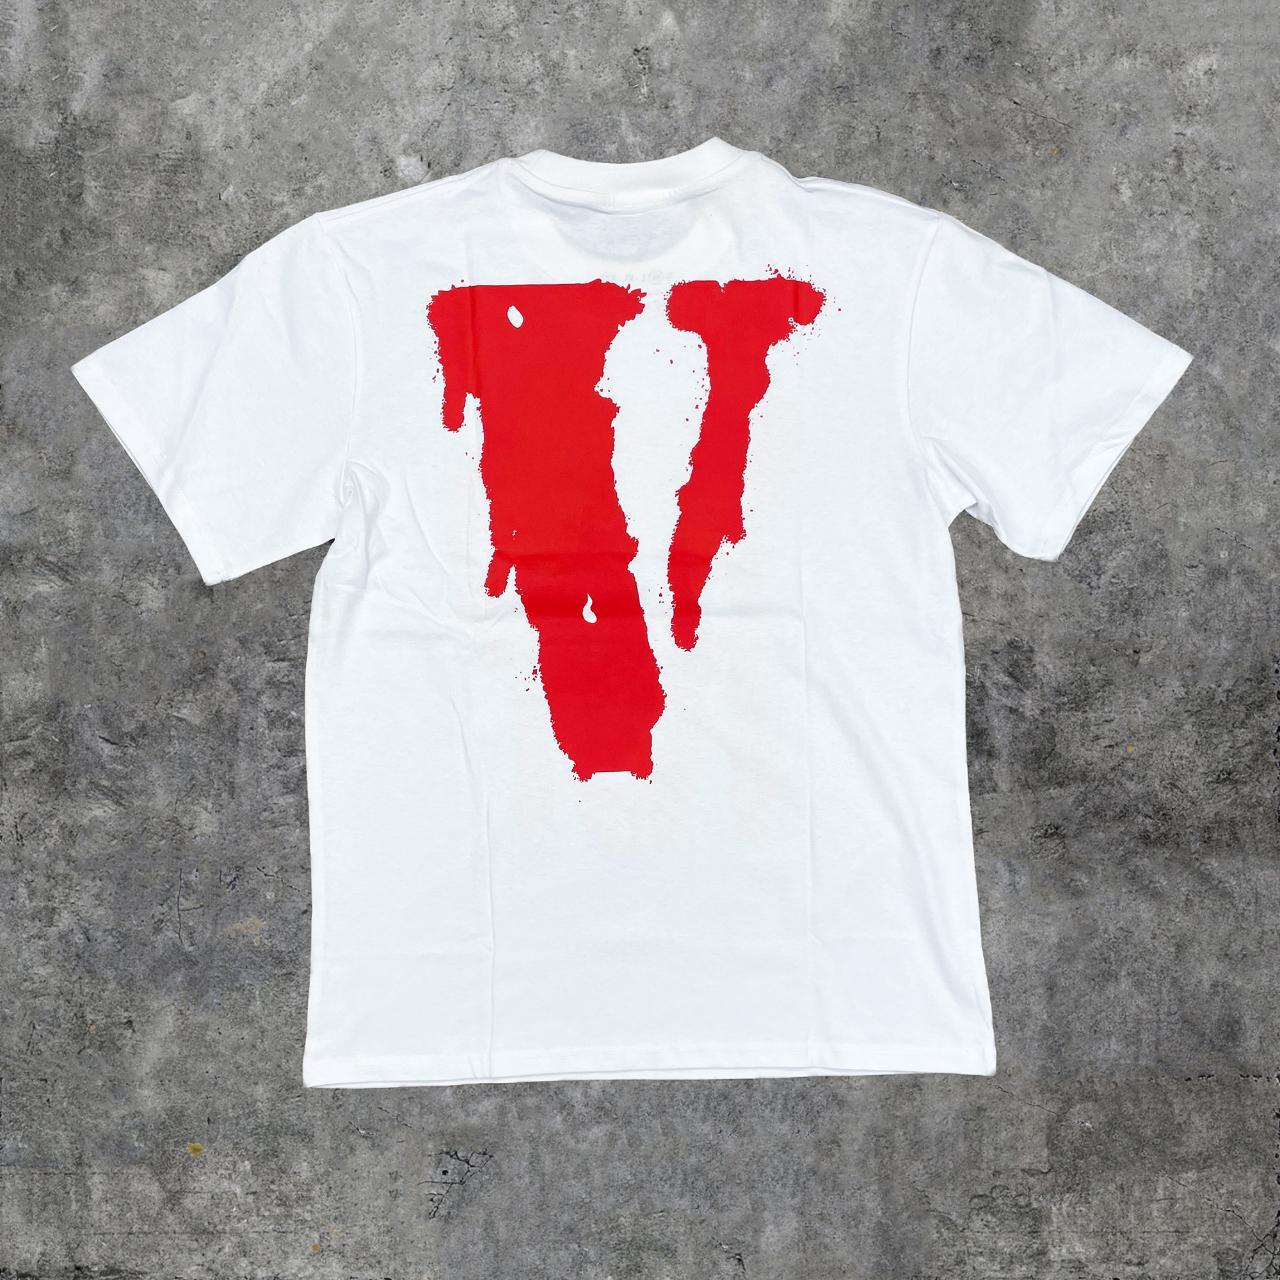 VLONE x YoungBoy NBA TOP Red on White T-shirt 🏆... - Depop